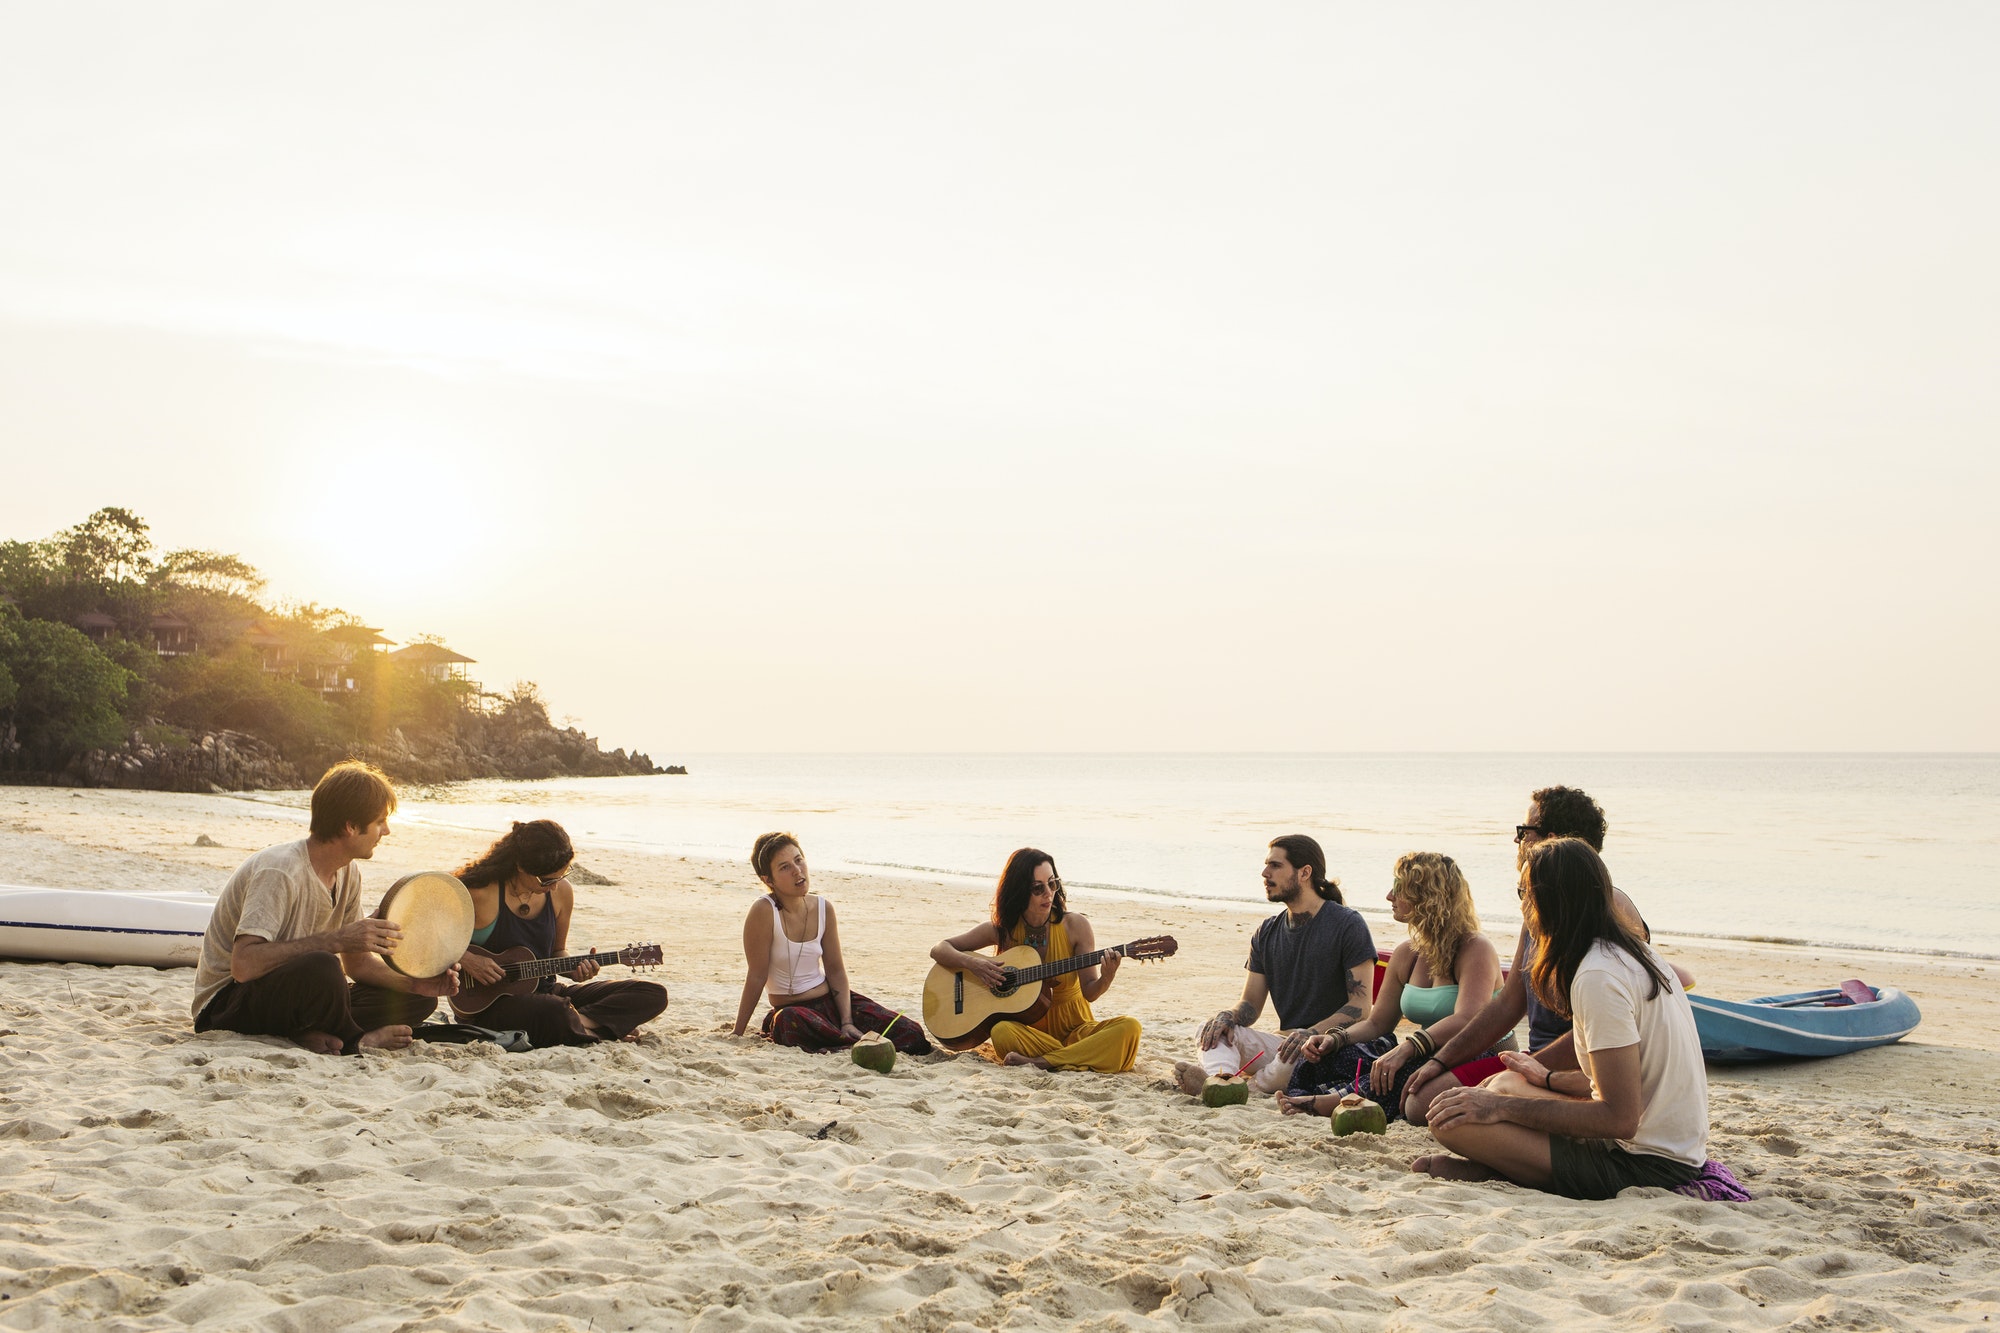 Thailand, Koh Phangan, group of people sitting on a beach with guitar at sunset